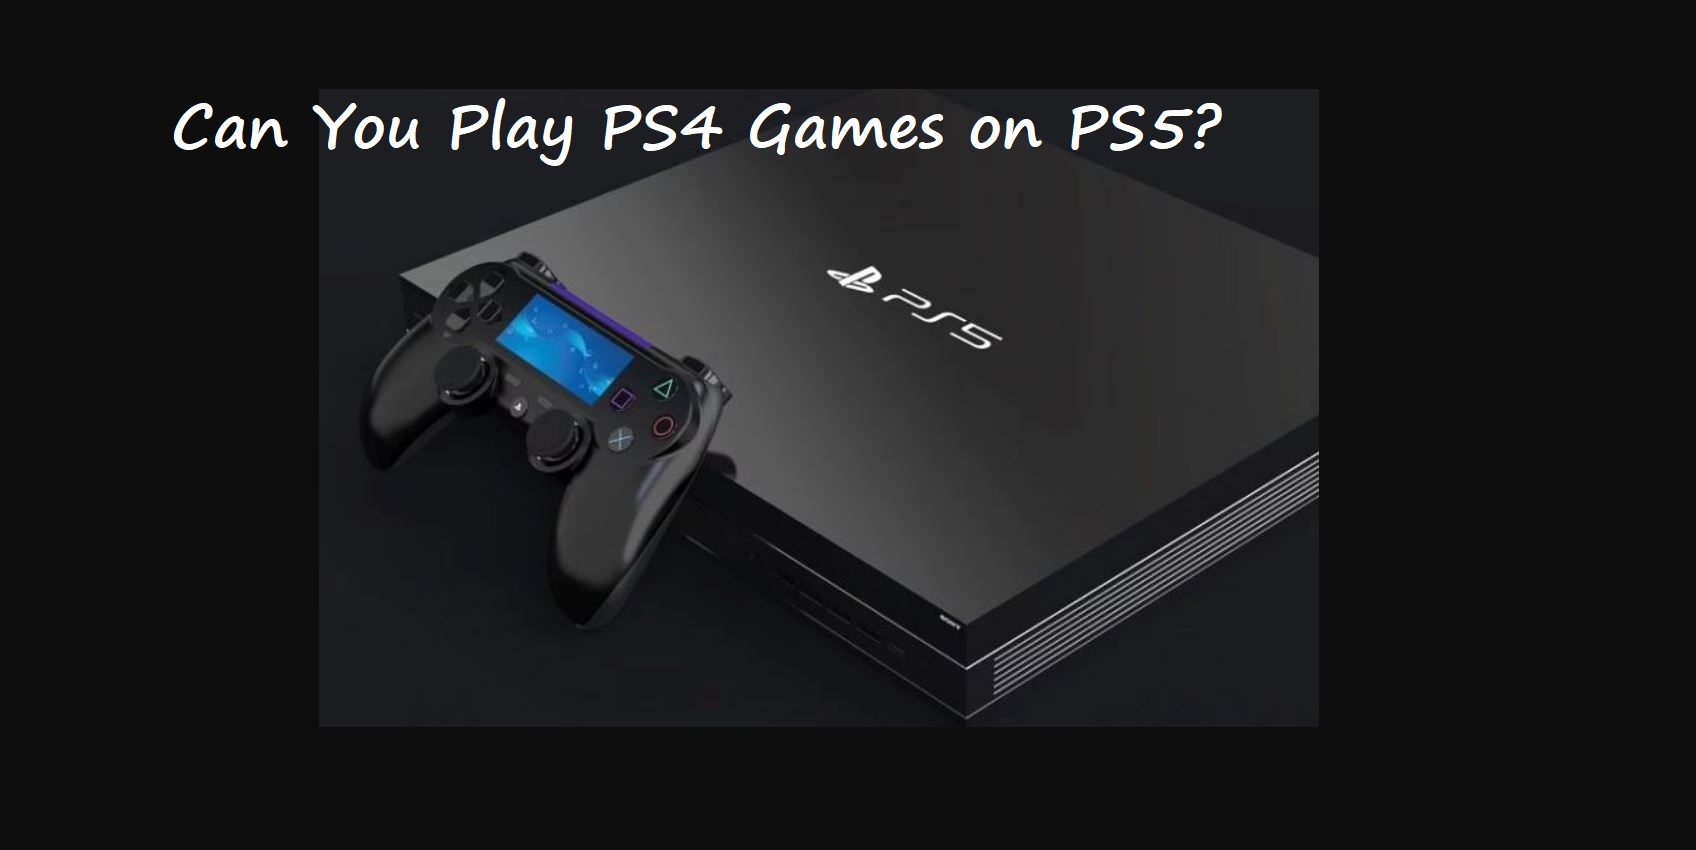 Can You Play PS4 Games on PS5